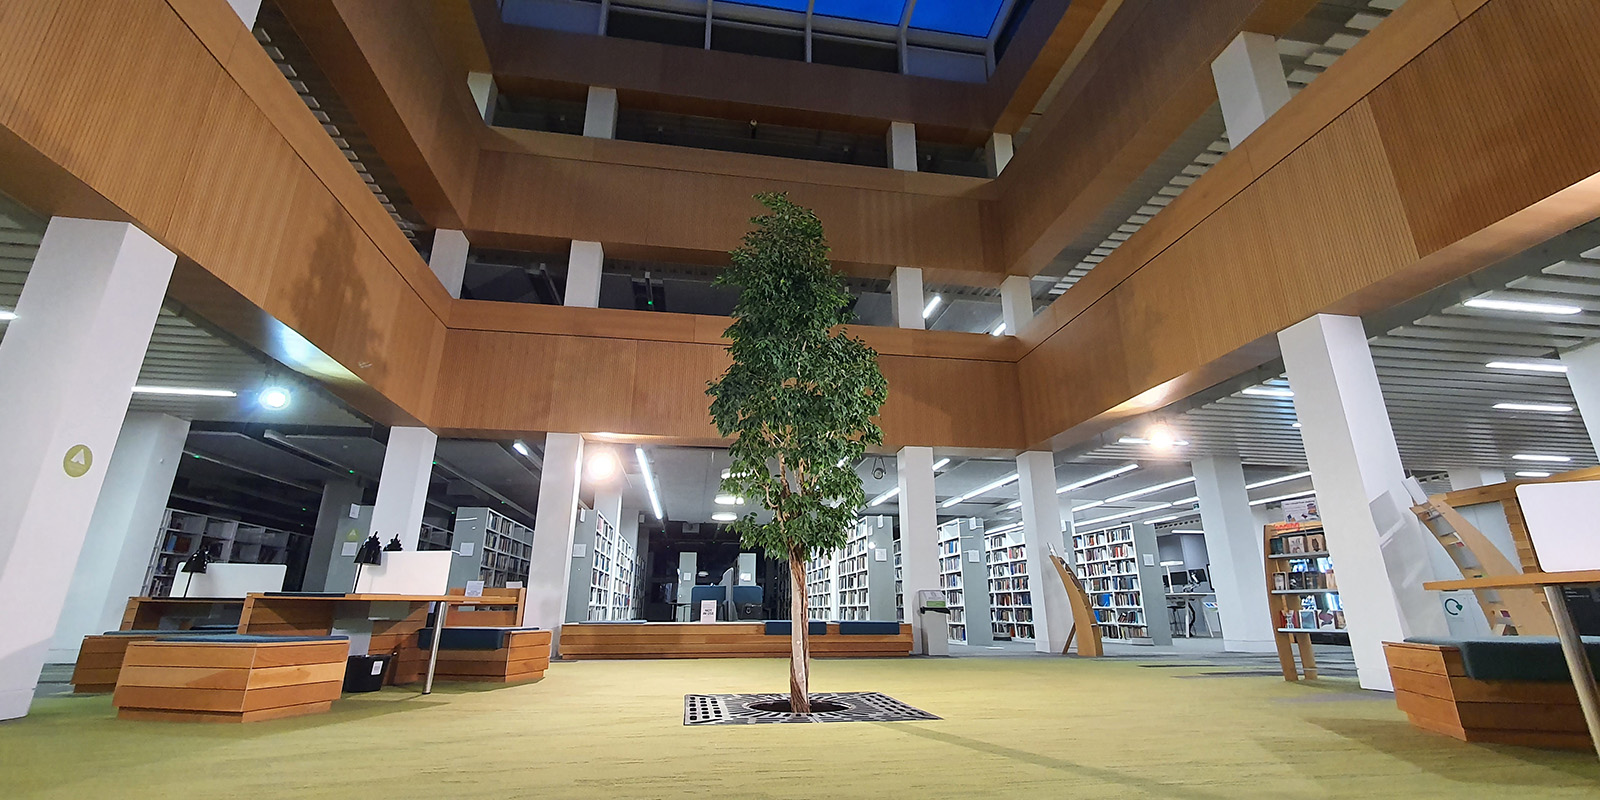 Lancaster University library foyer with the living tree in the centre.